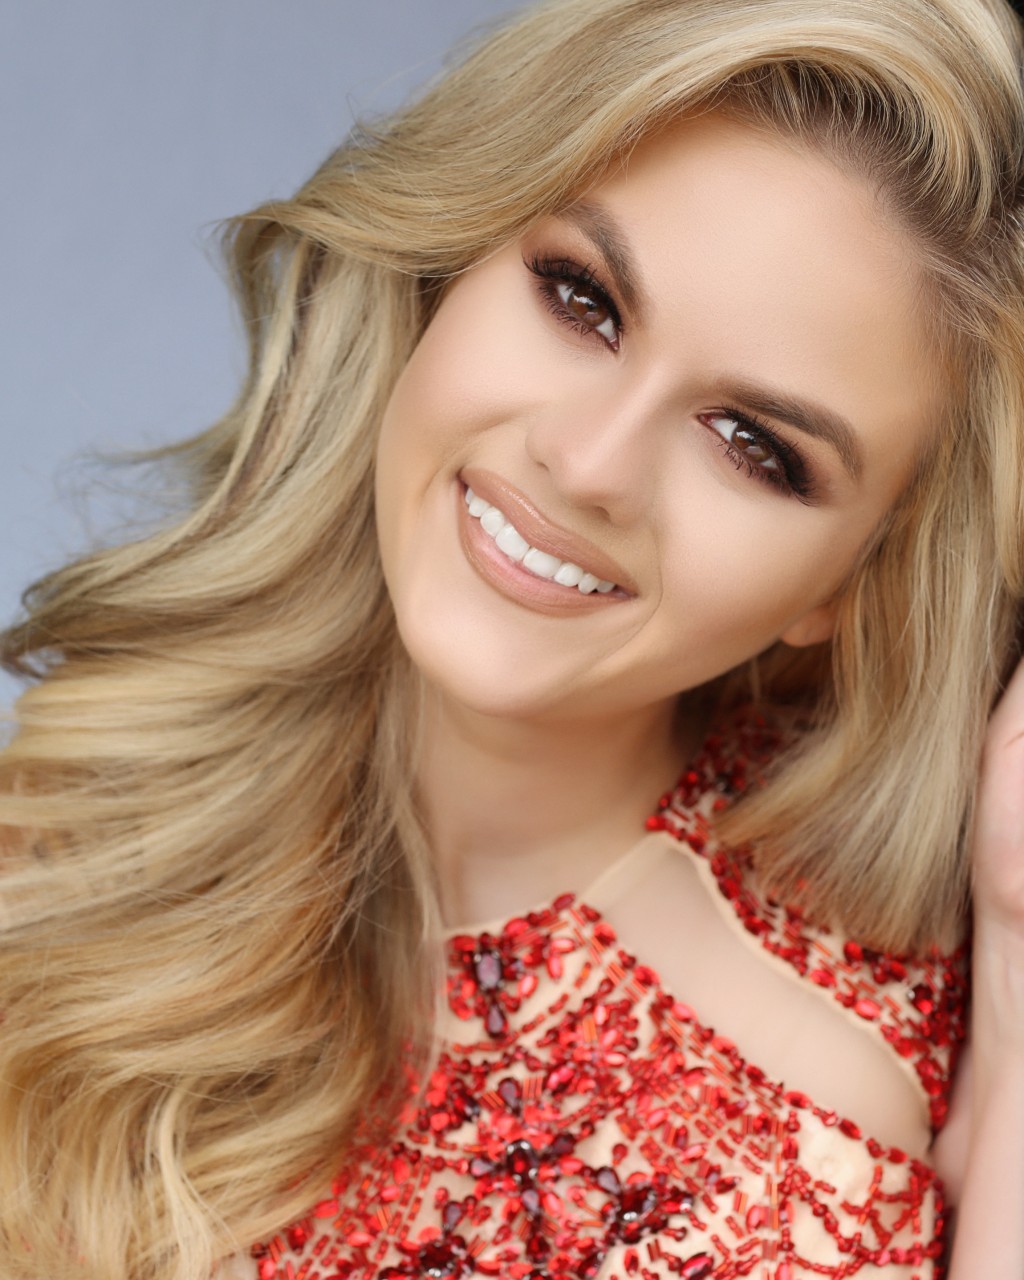 USF student with autism will compete in Miss Florida pageant